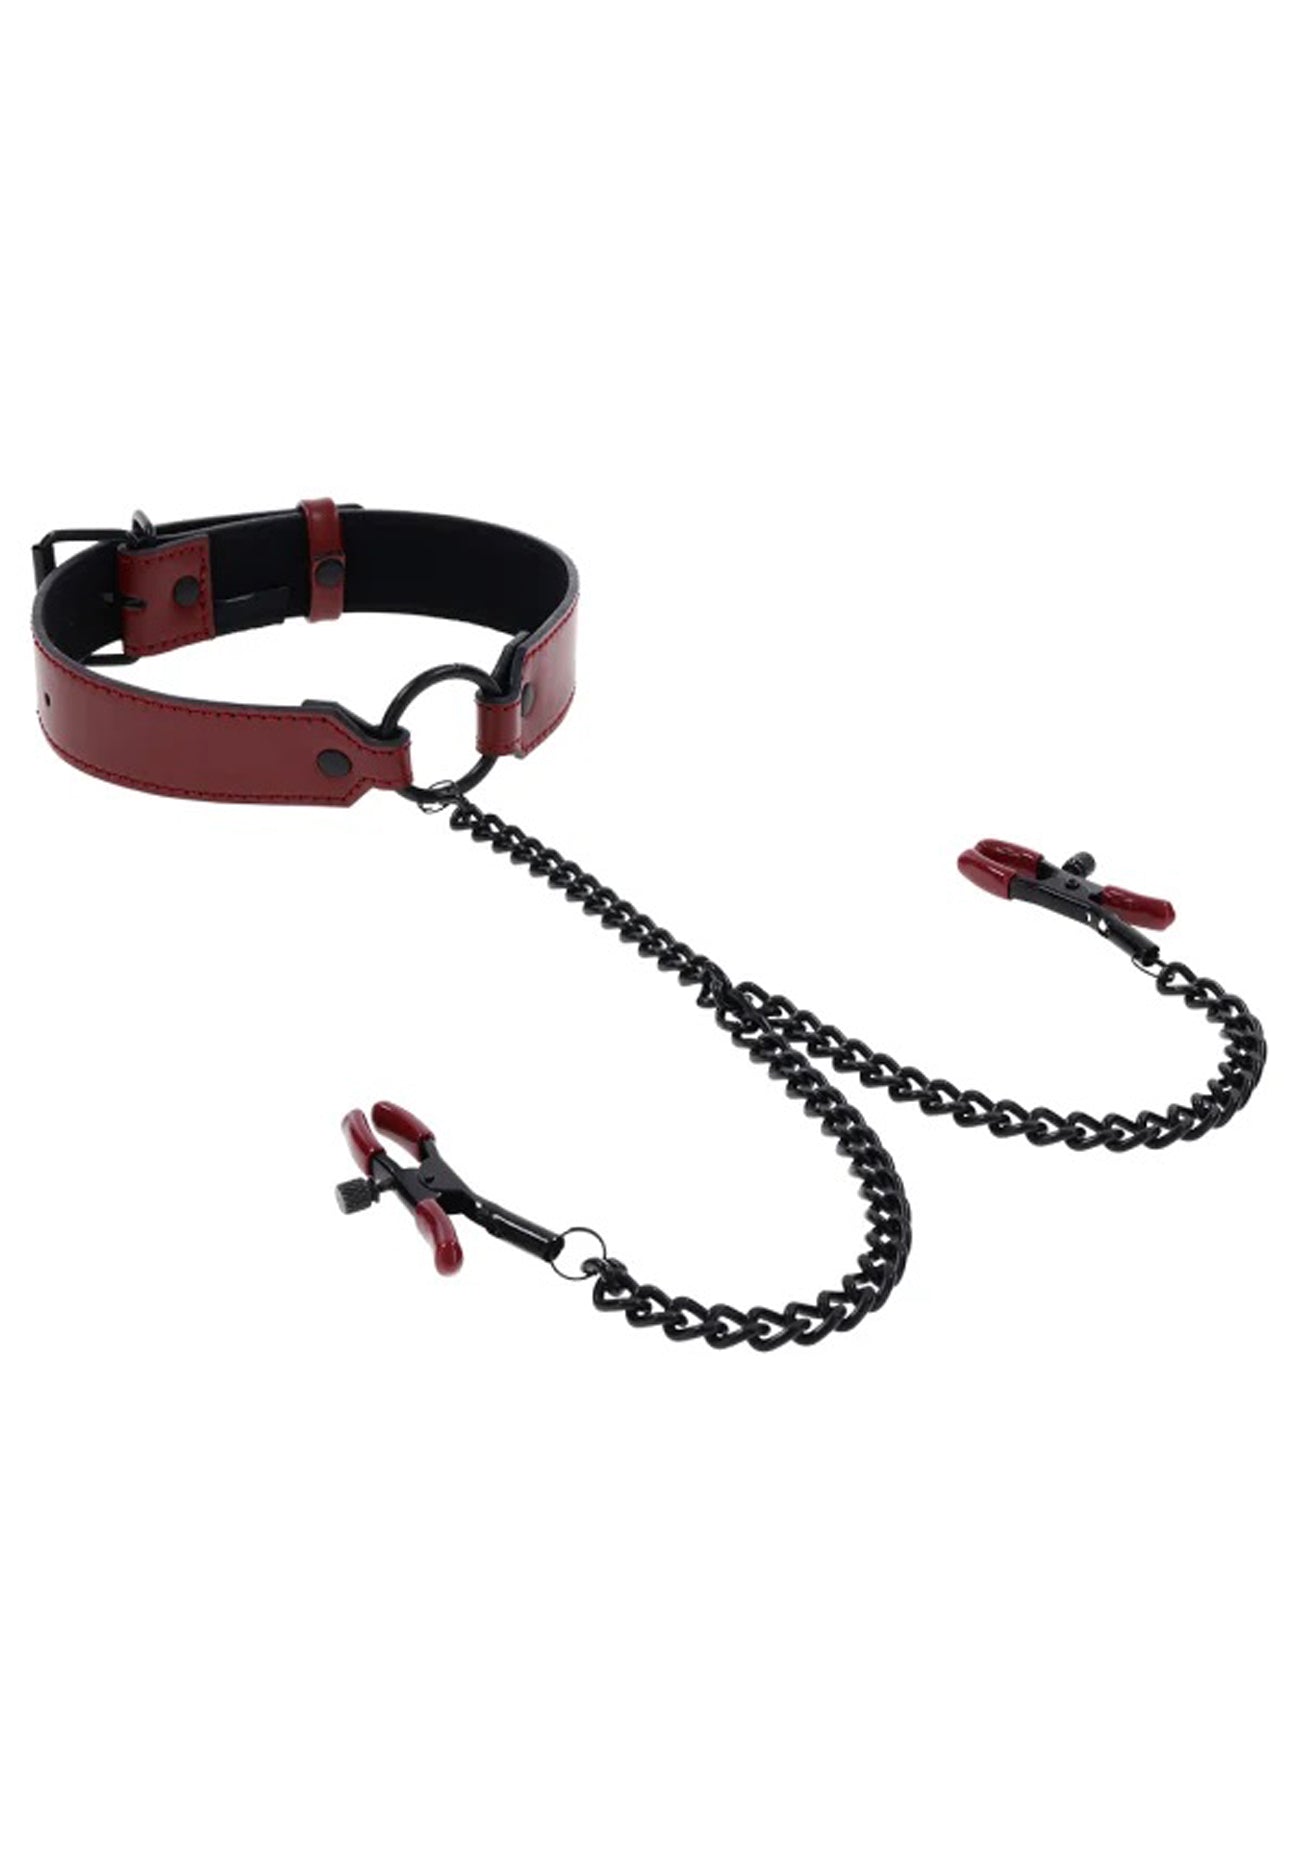 Saffron Collar With Nipple Clamps - Black/red-4